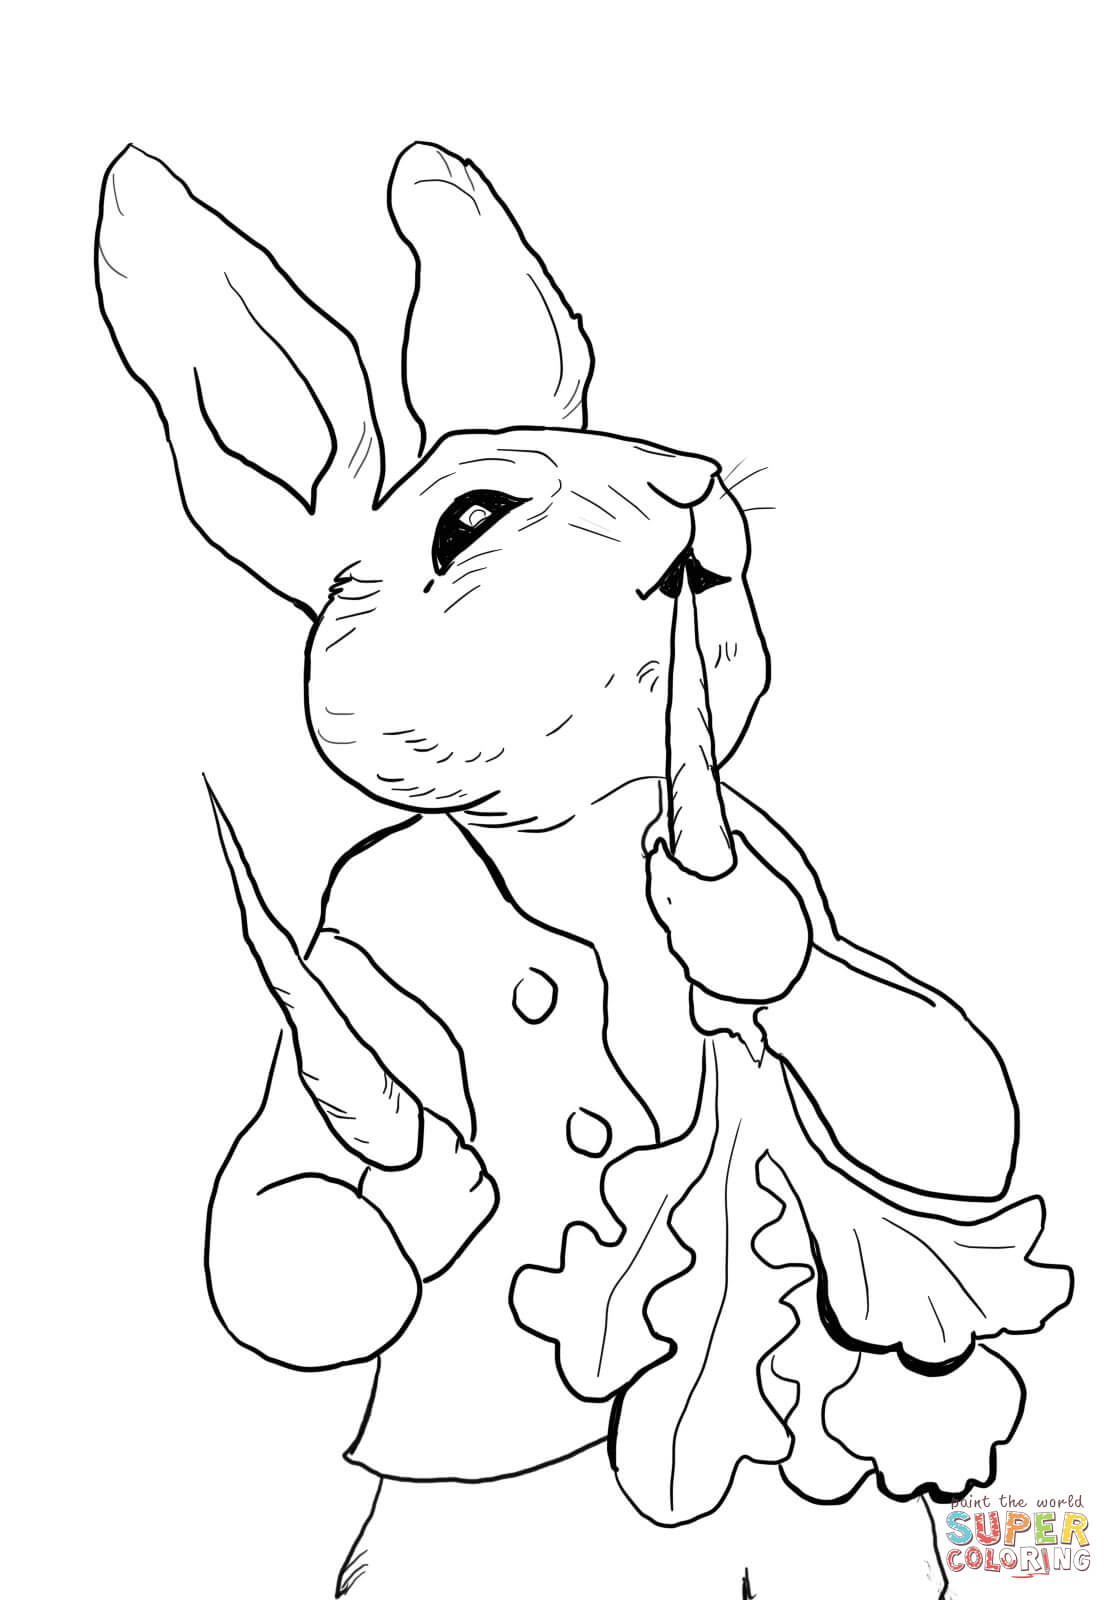 Free Rabbit Coloring Pages Coloring Pages Peter Rabbit Eating Radishes Coloring Page Free